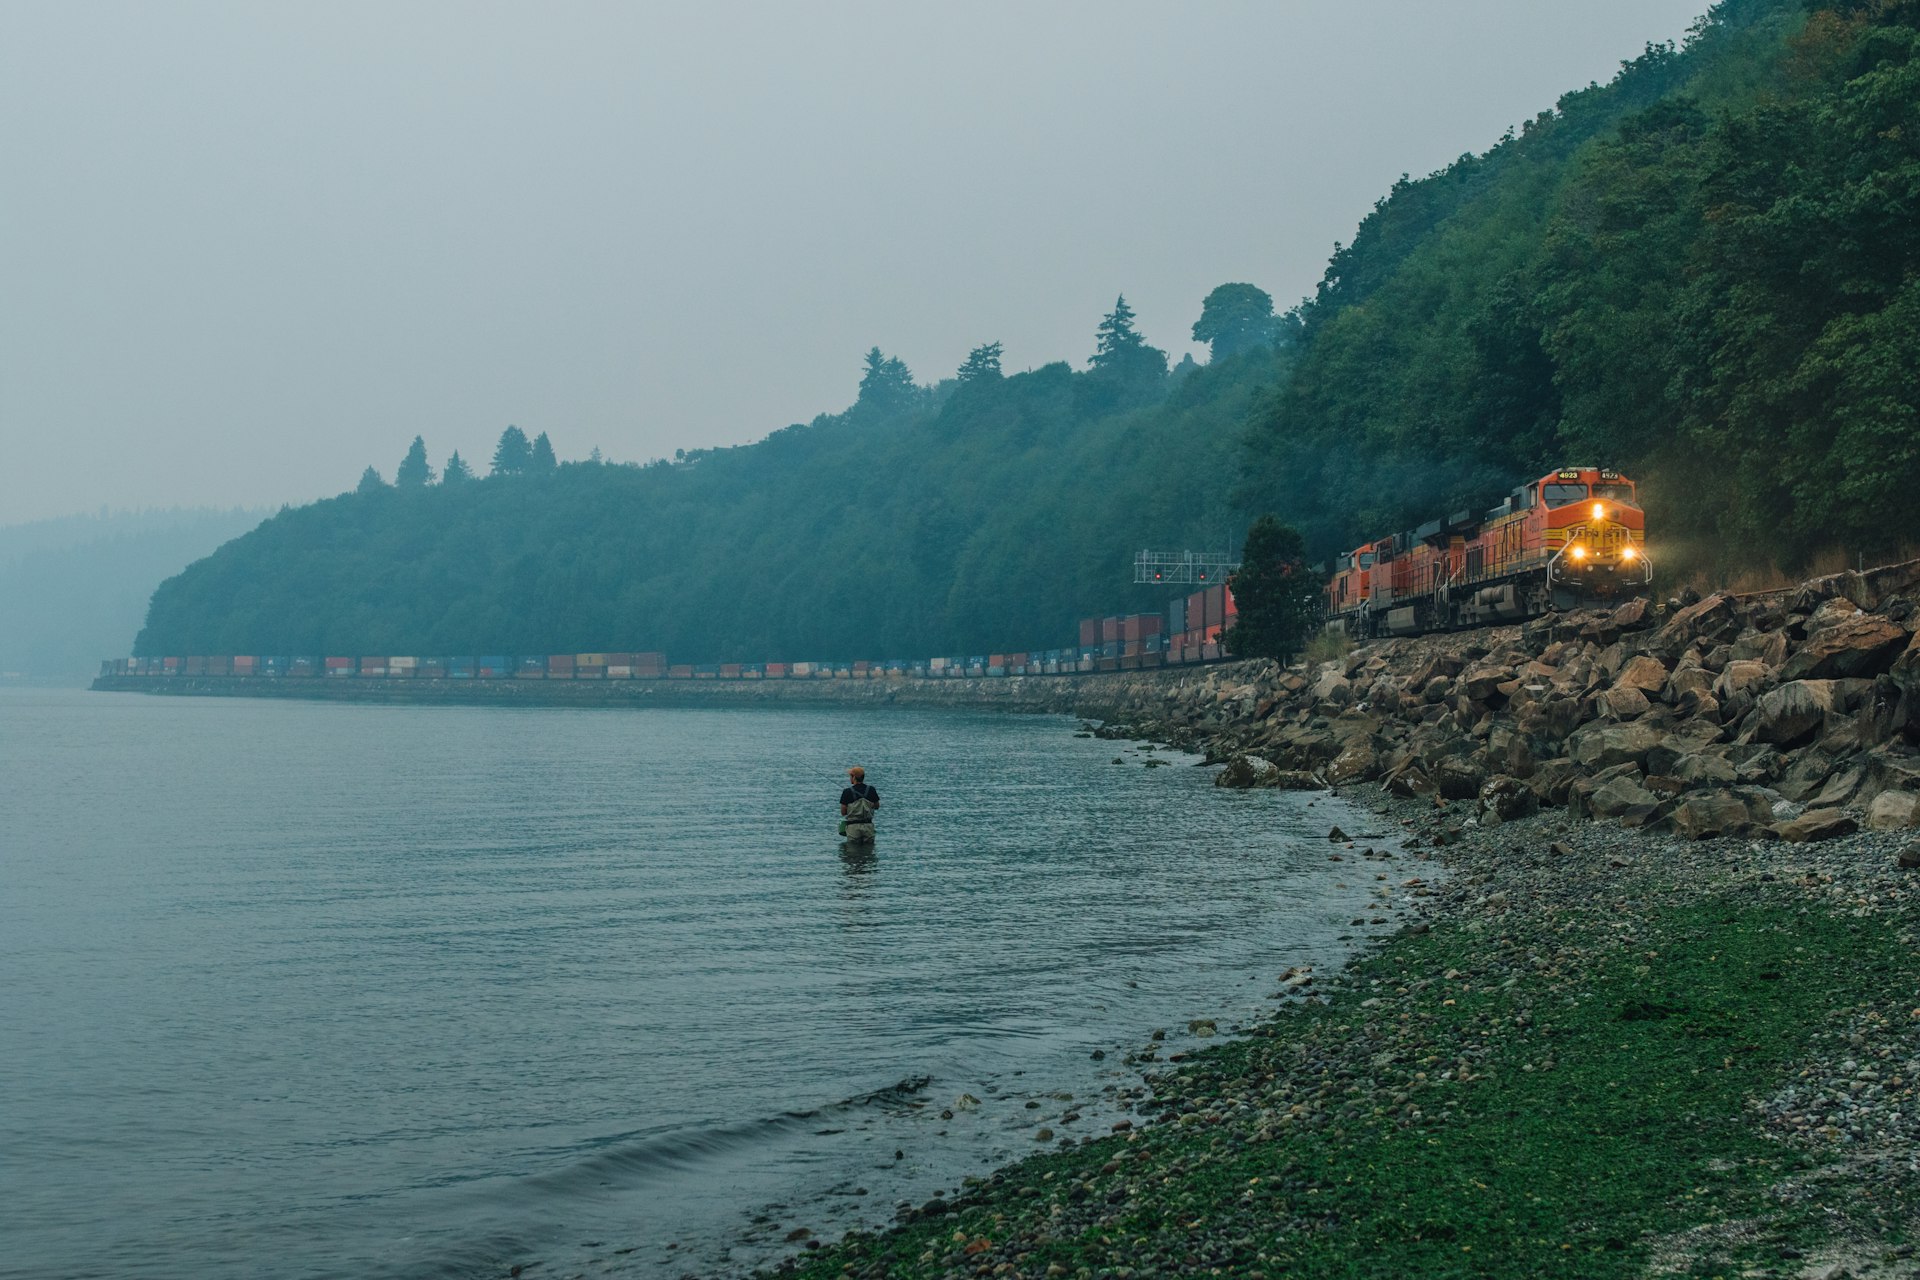 BNSF freight train traveling through Carkeek Park during a misty evening with single man fishing in Puget Sound, Seattle